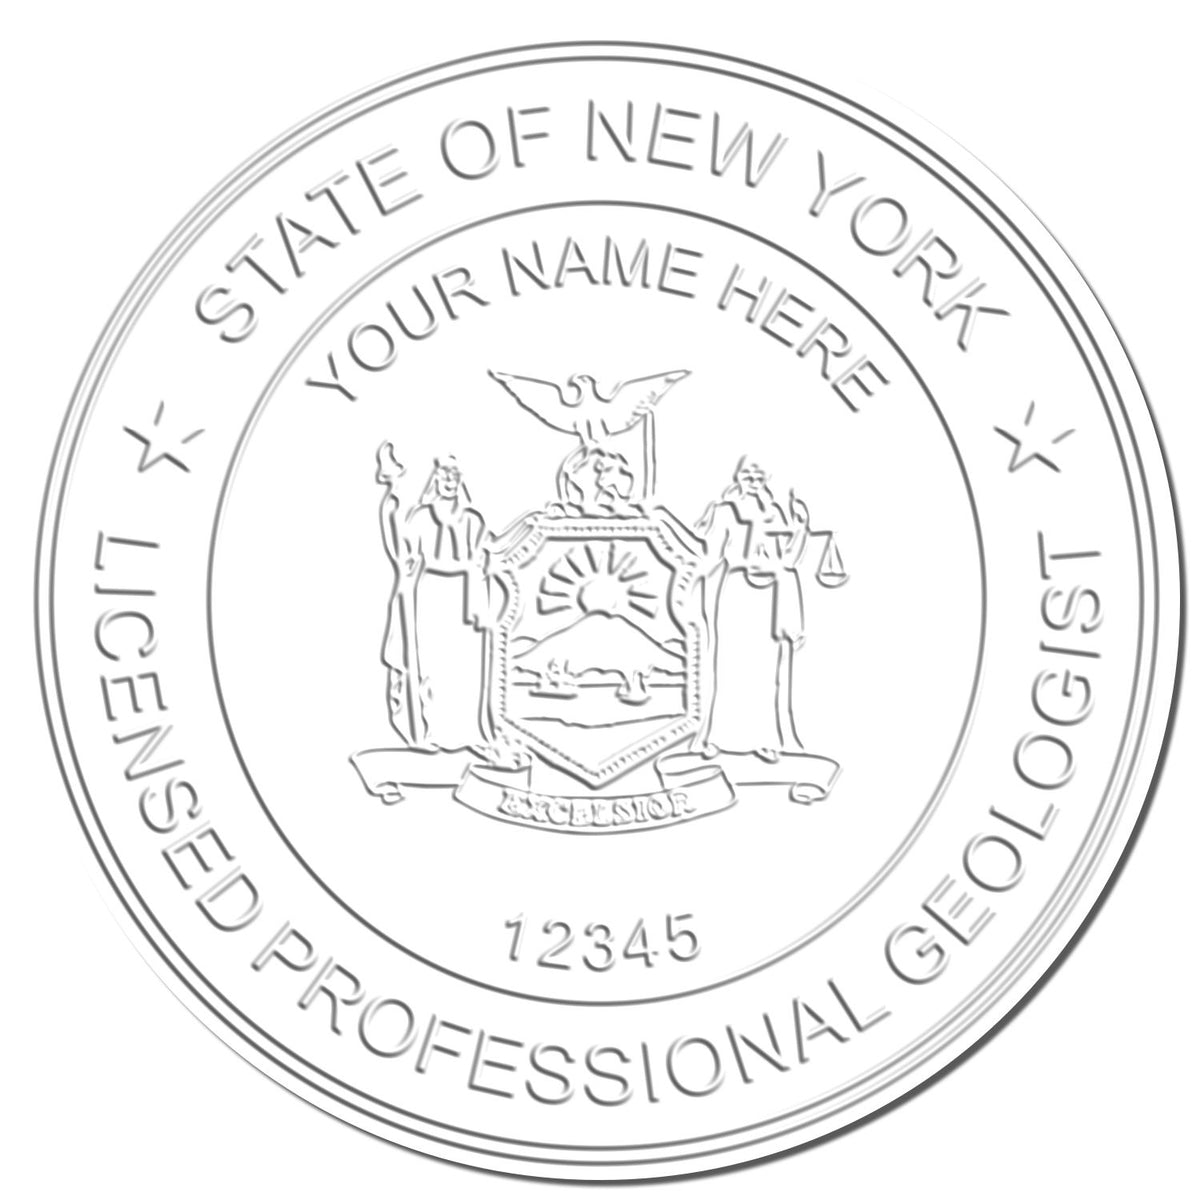 The New York Geologist Desk Seal stamp impression comes to life with a crisp, detailed image stamped on paper - showcasing true professional quality.